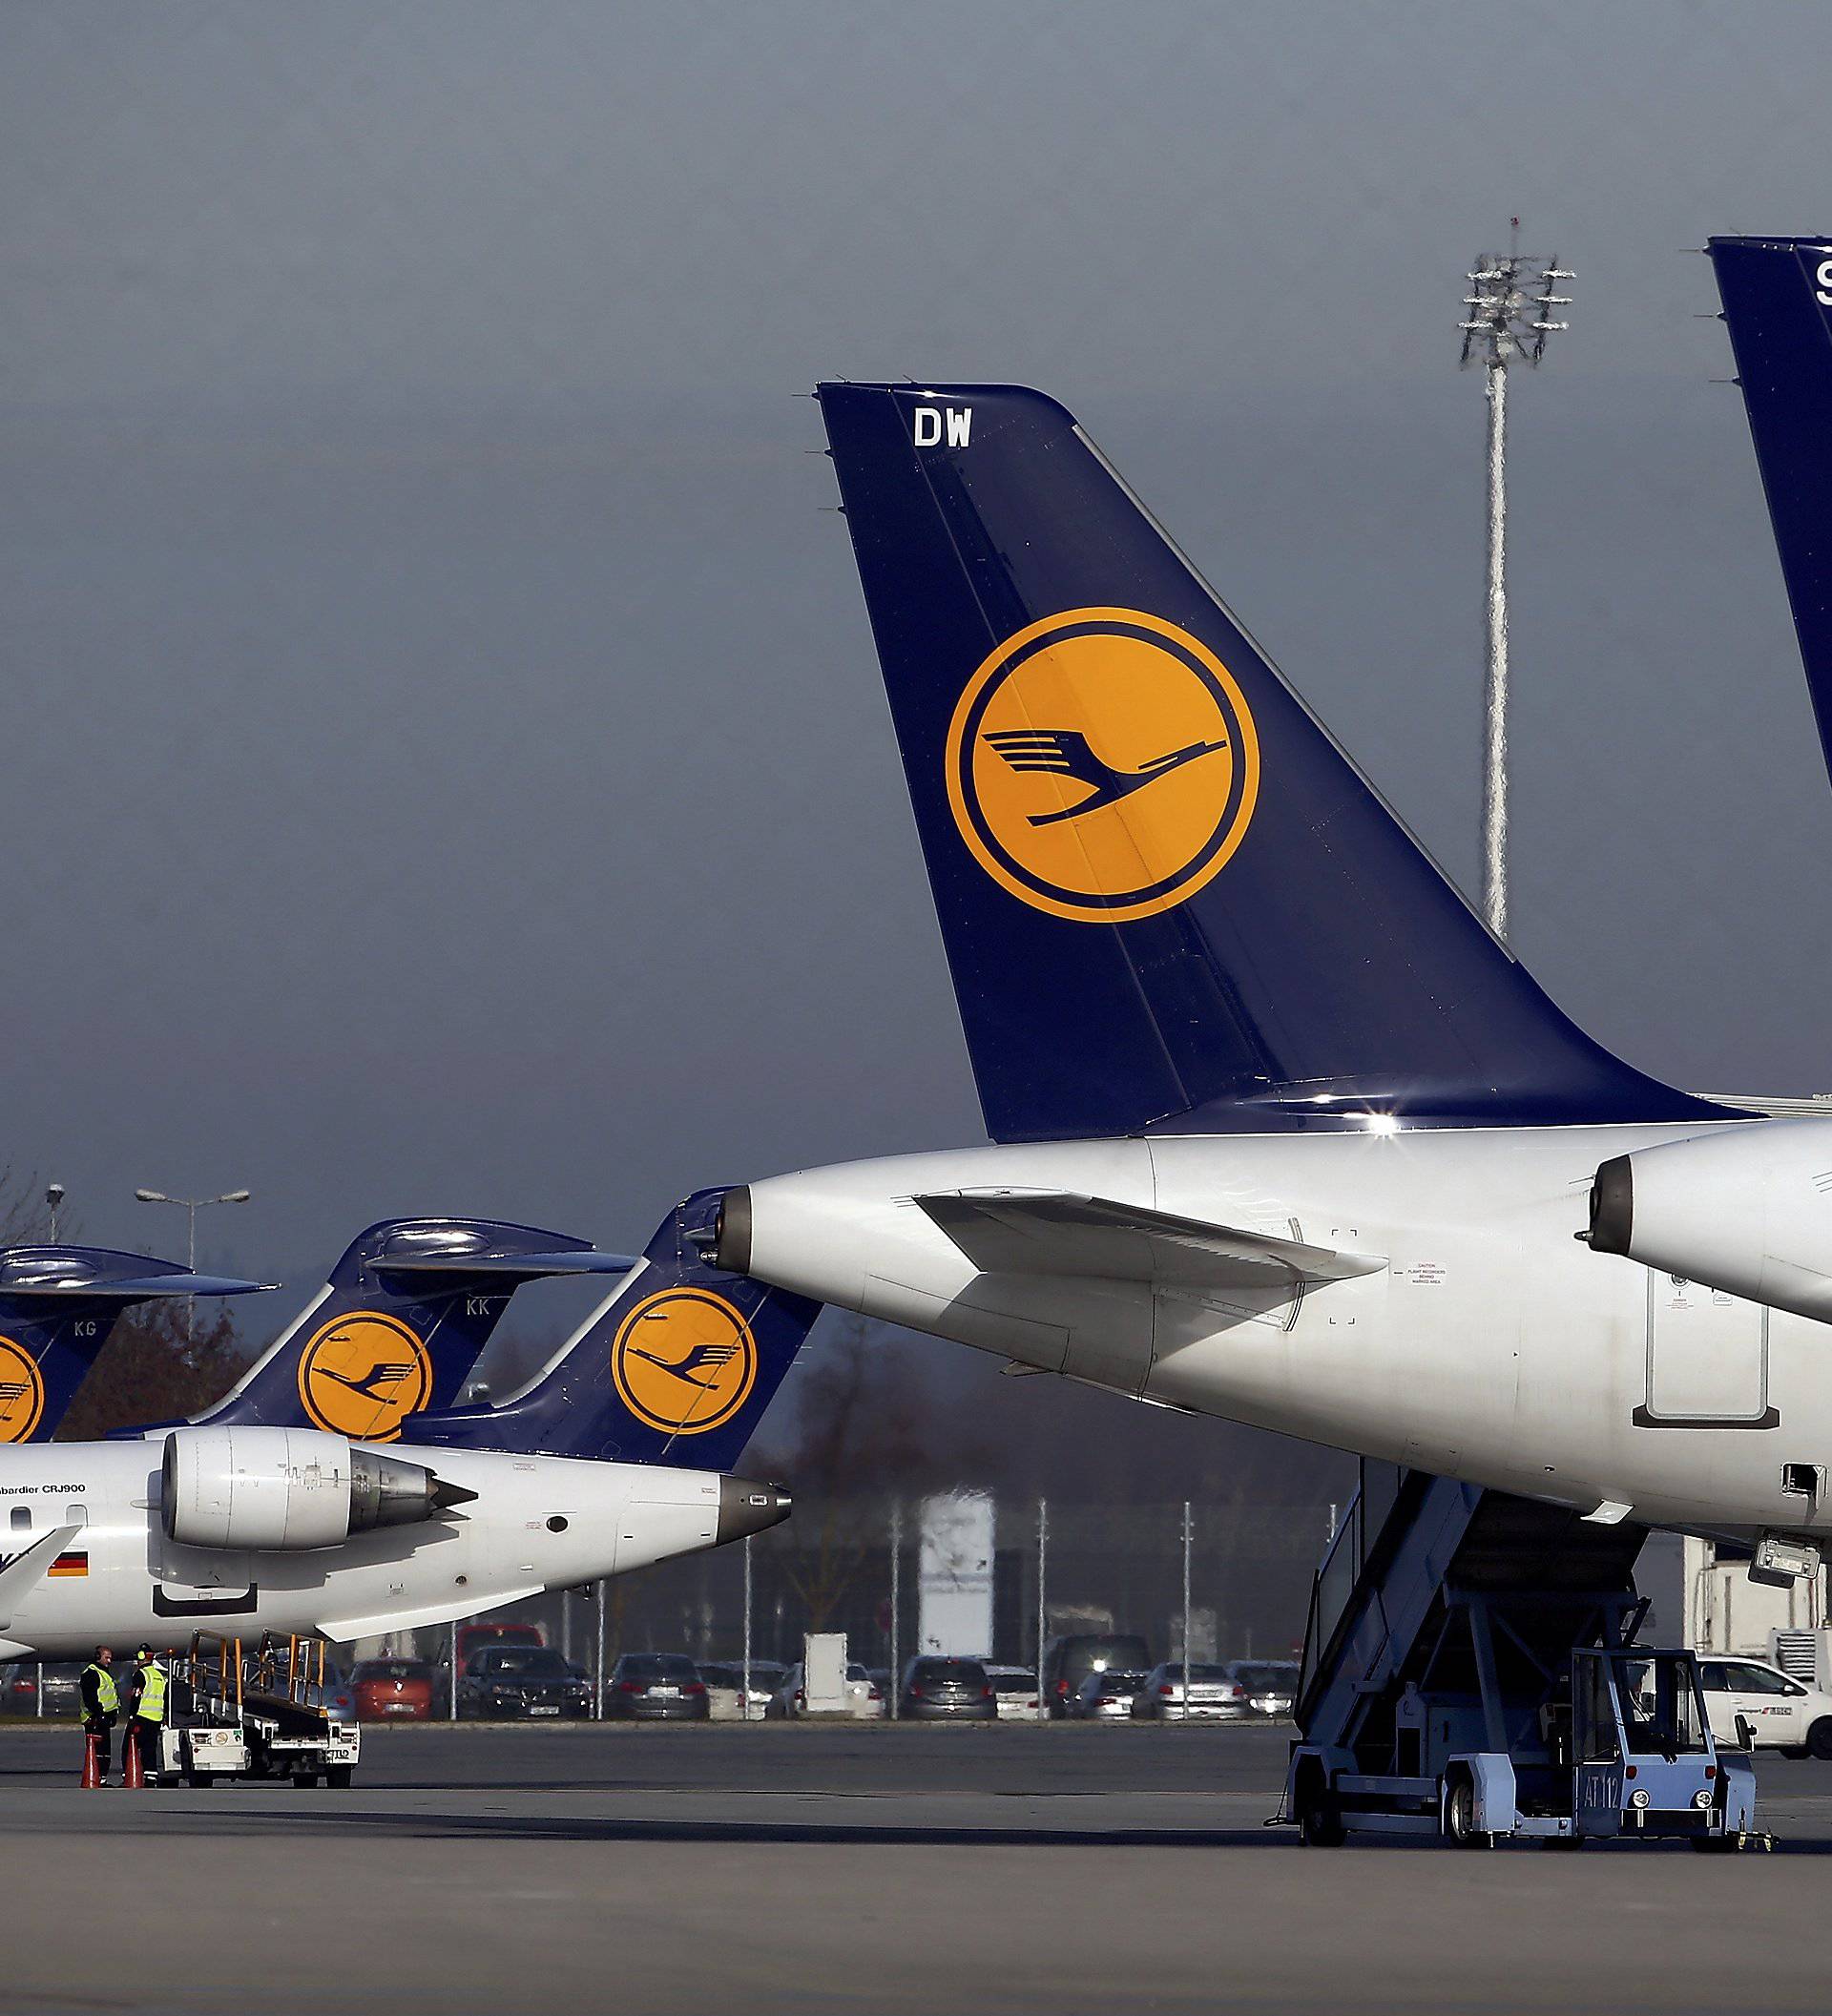 Planes stand on the tarmac during a pilots strike of German airline Lufthansa at  Munich airport